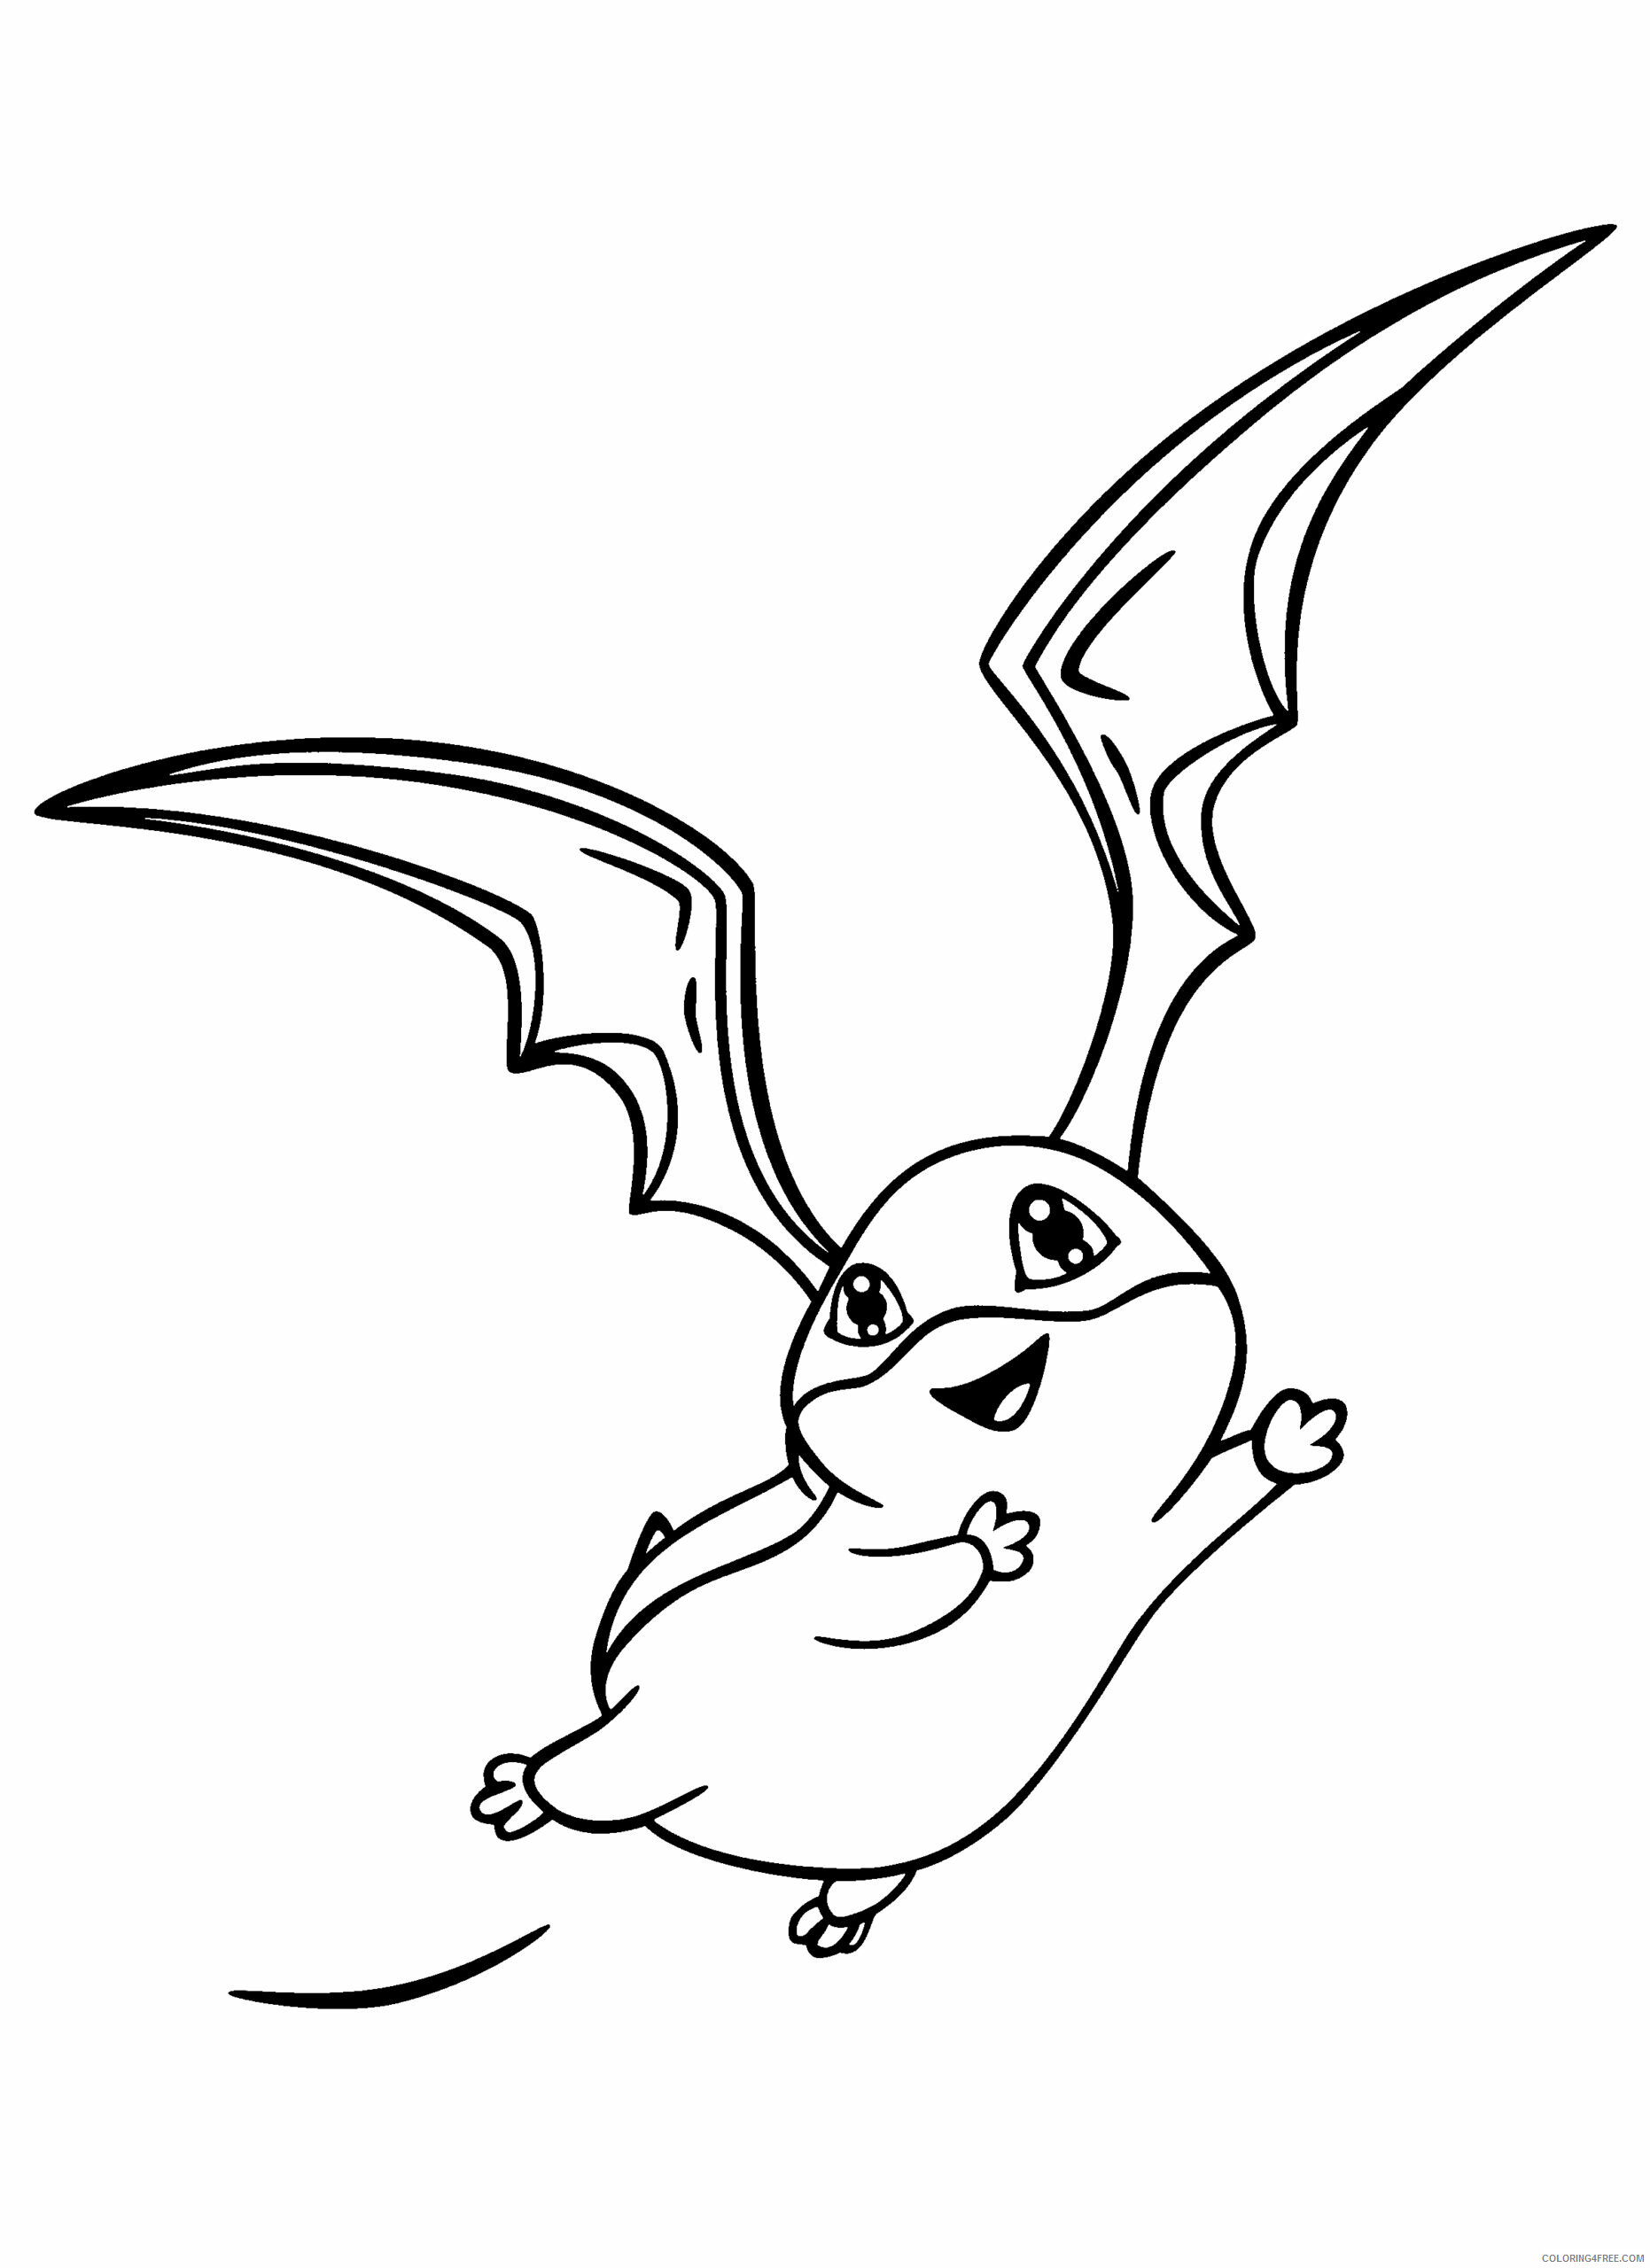 Digimon Printable Coloring Pages Anime digimon nNUVr 2021 0182 Coloring4free